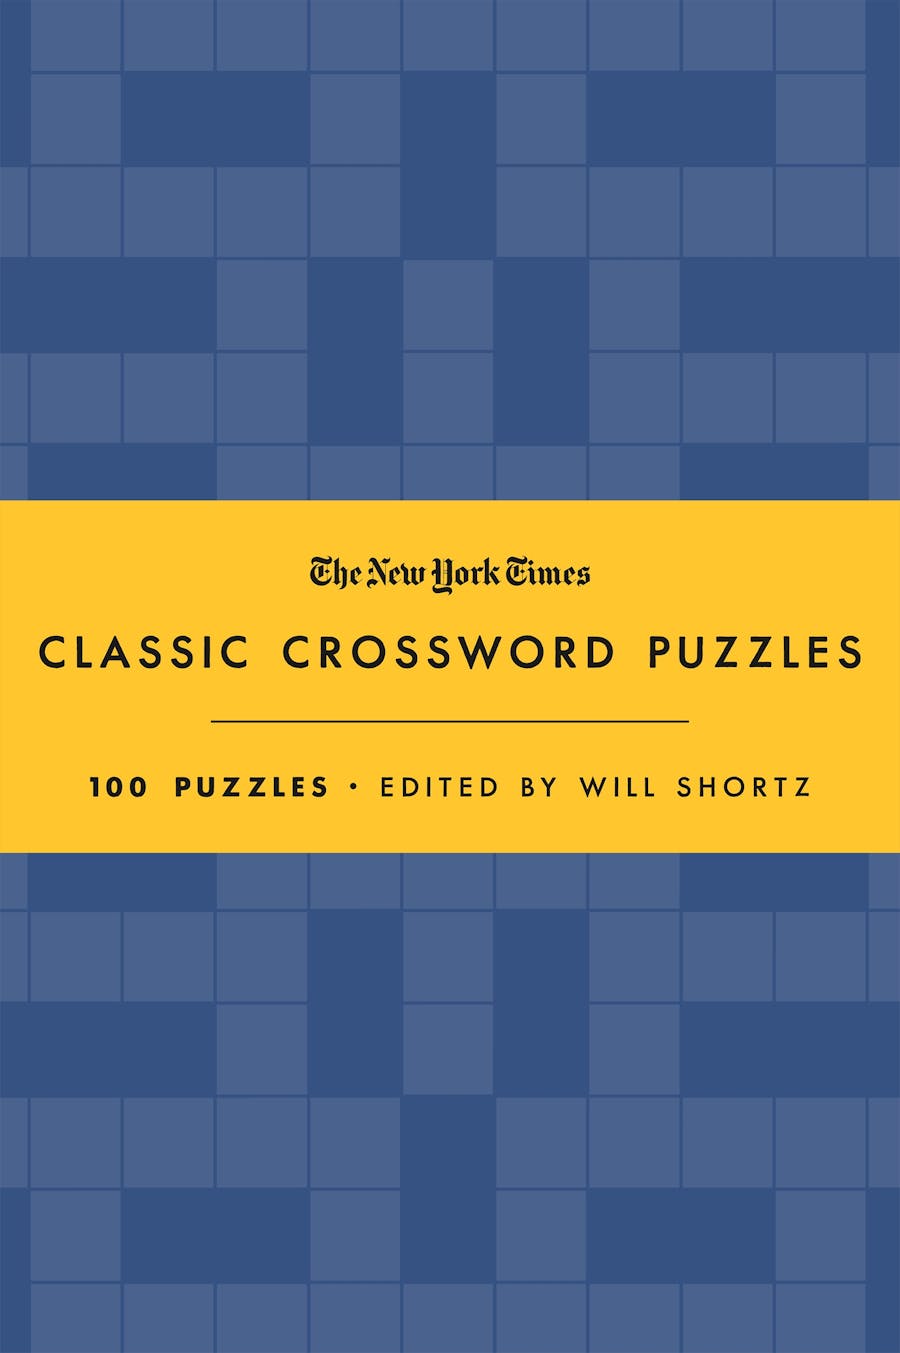 NYT Classic Crosswords Puzzles (Yellow & Blue) edited by Will Shortz, 100 puzzle